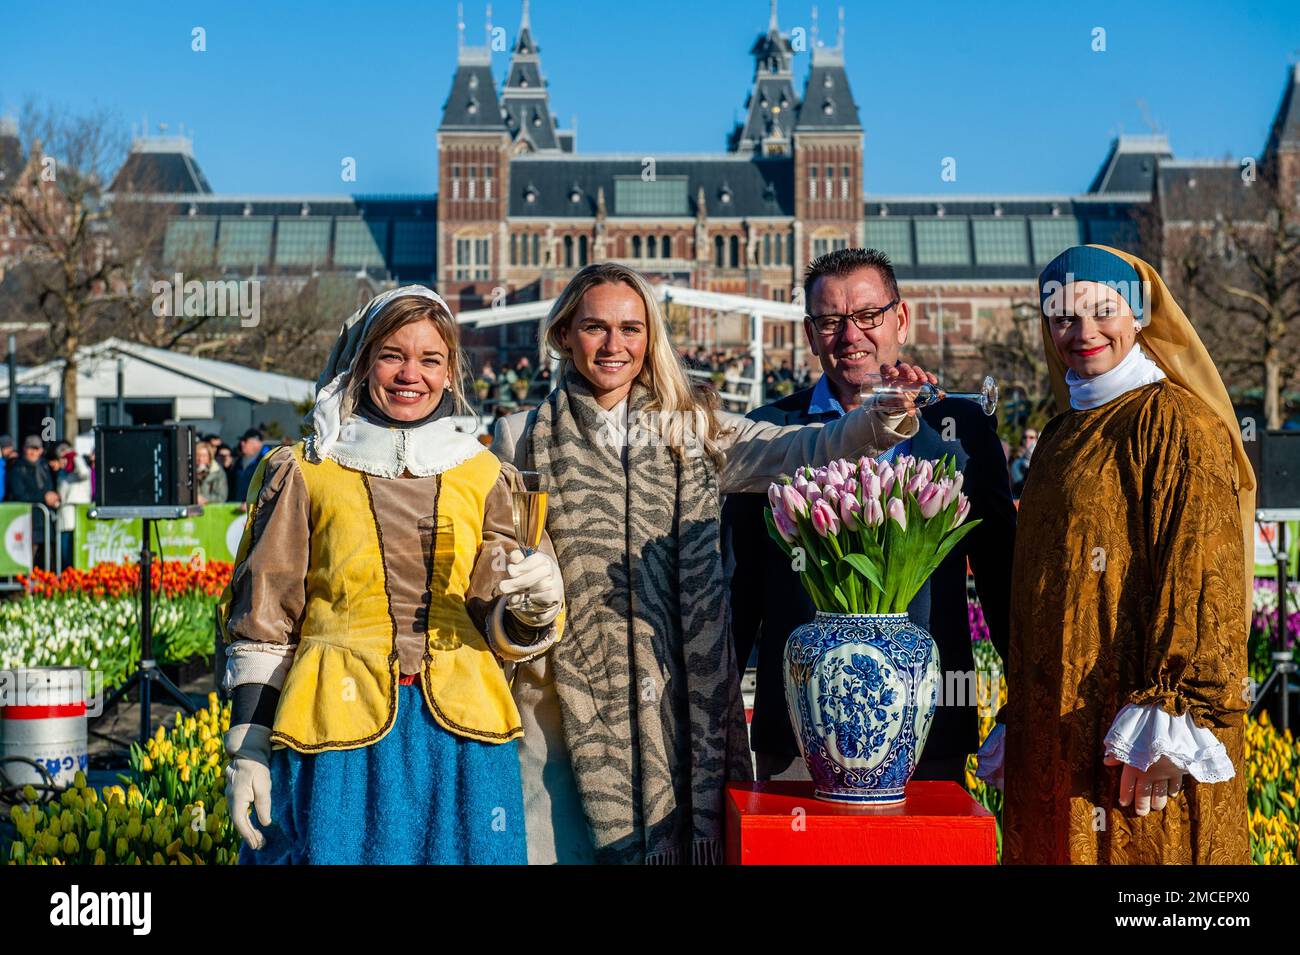 Olympic skating champion, Irene Schouten (middle left), President of the organization 'Tulpen promotie Nederland', Arjan Smit (middle right) are seen posing for the media. Each year on the 3rd Saturday of January, the National Tulip Day is celebrated in Amsterdam. Dutch tulip growers built a huge picking garden with more than 200,000 colorful tulips at the Museumplein in Amsterdam. Visitors are allowed to pick tulips for free. The event was opened by Olympic skating champion, Irene Schouten. Prior to the opening, she christened a new tulip: Tulipa 'Dutch Pearl' as a reference to the world - fa Stock Photo